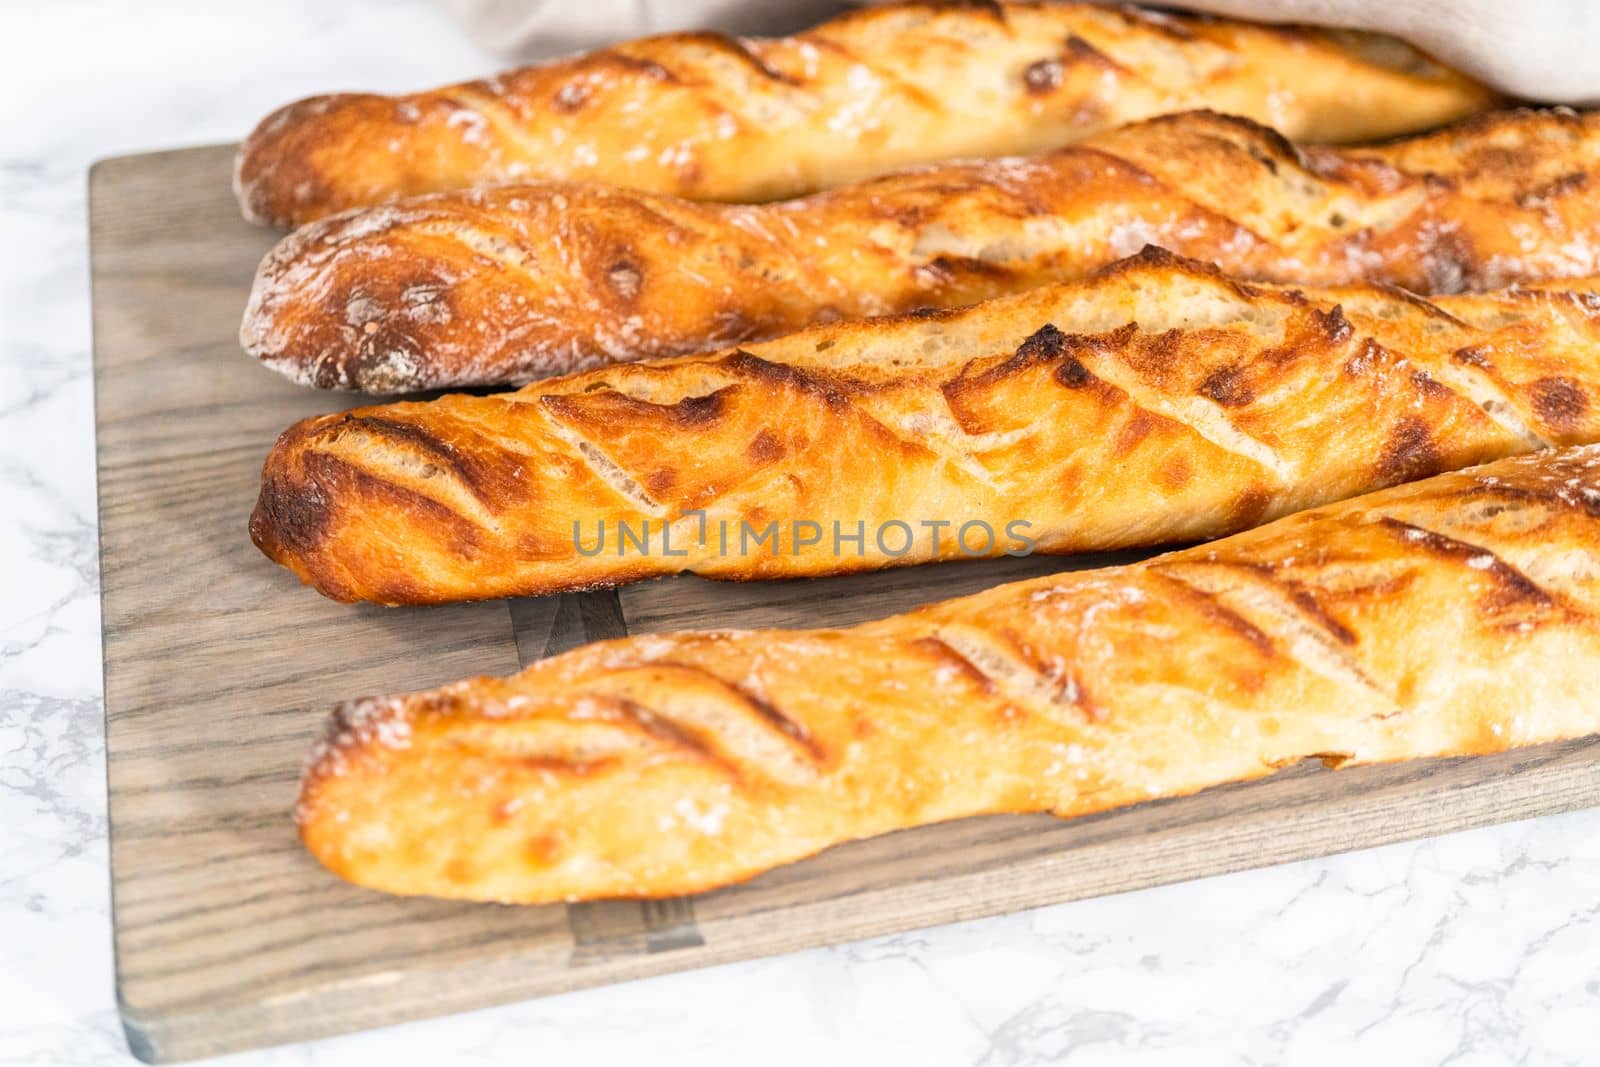 Freshly baked small French baguette bread.